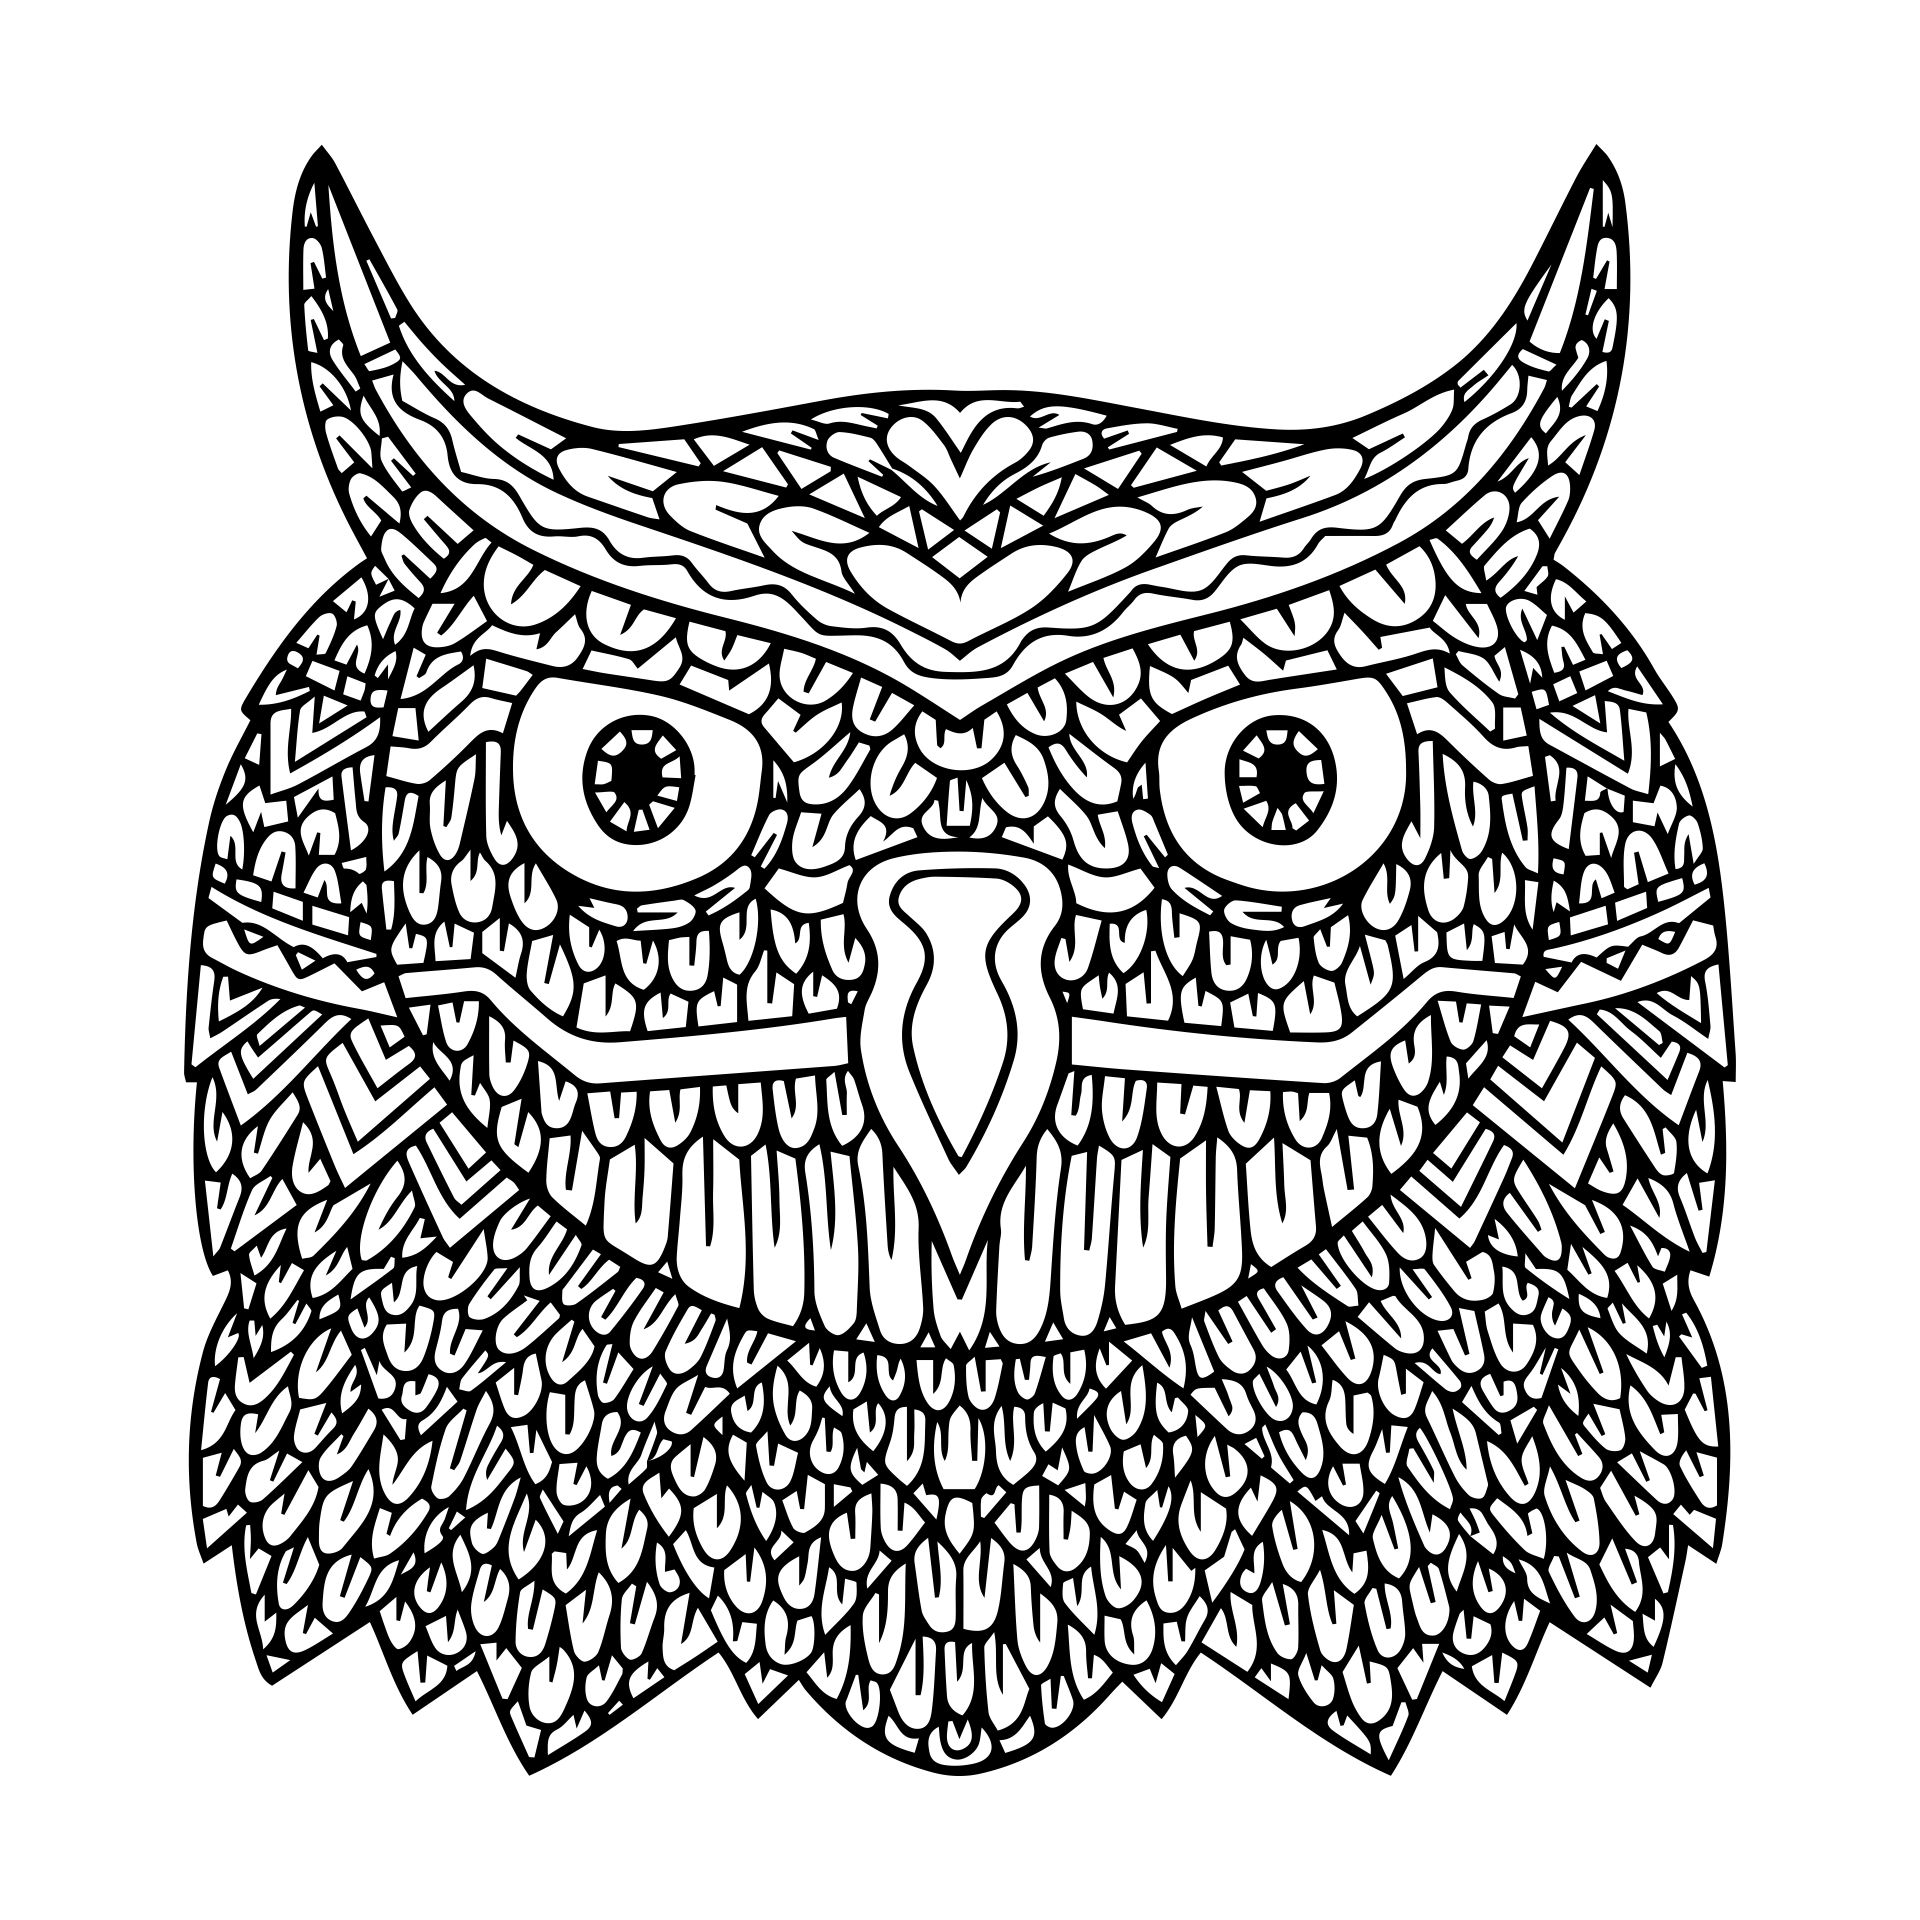 Scary Halloween Owl Coloring Pages